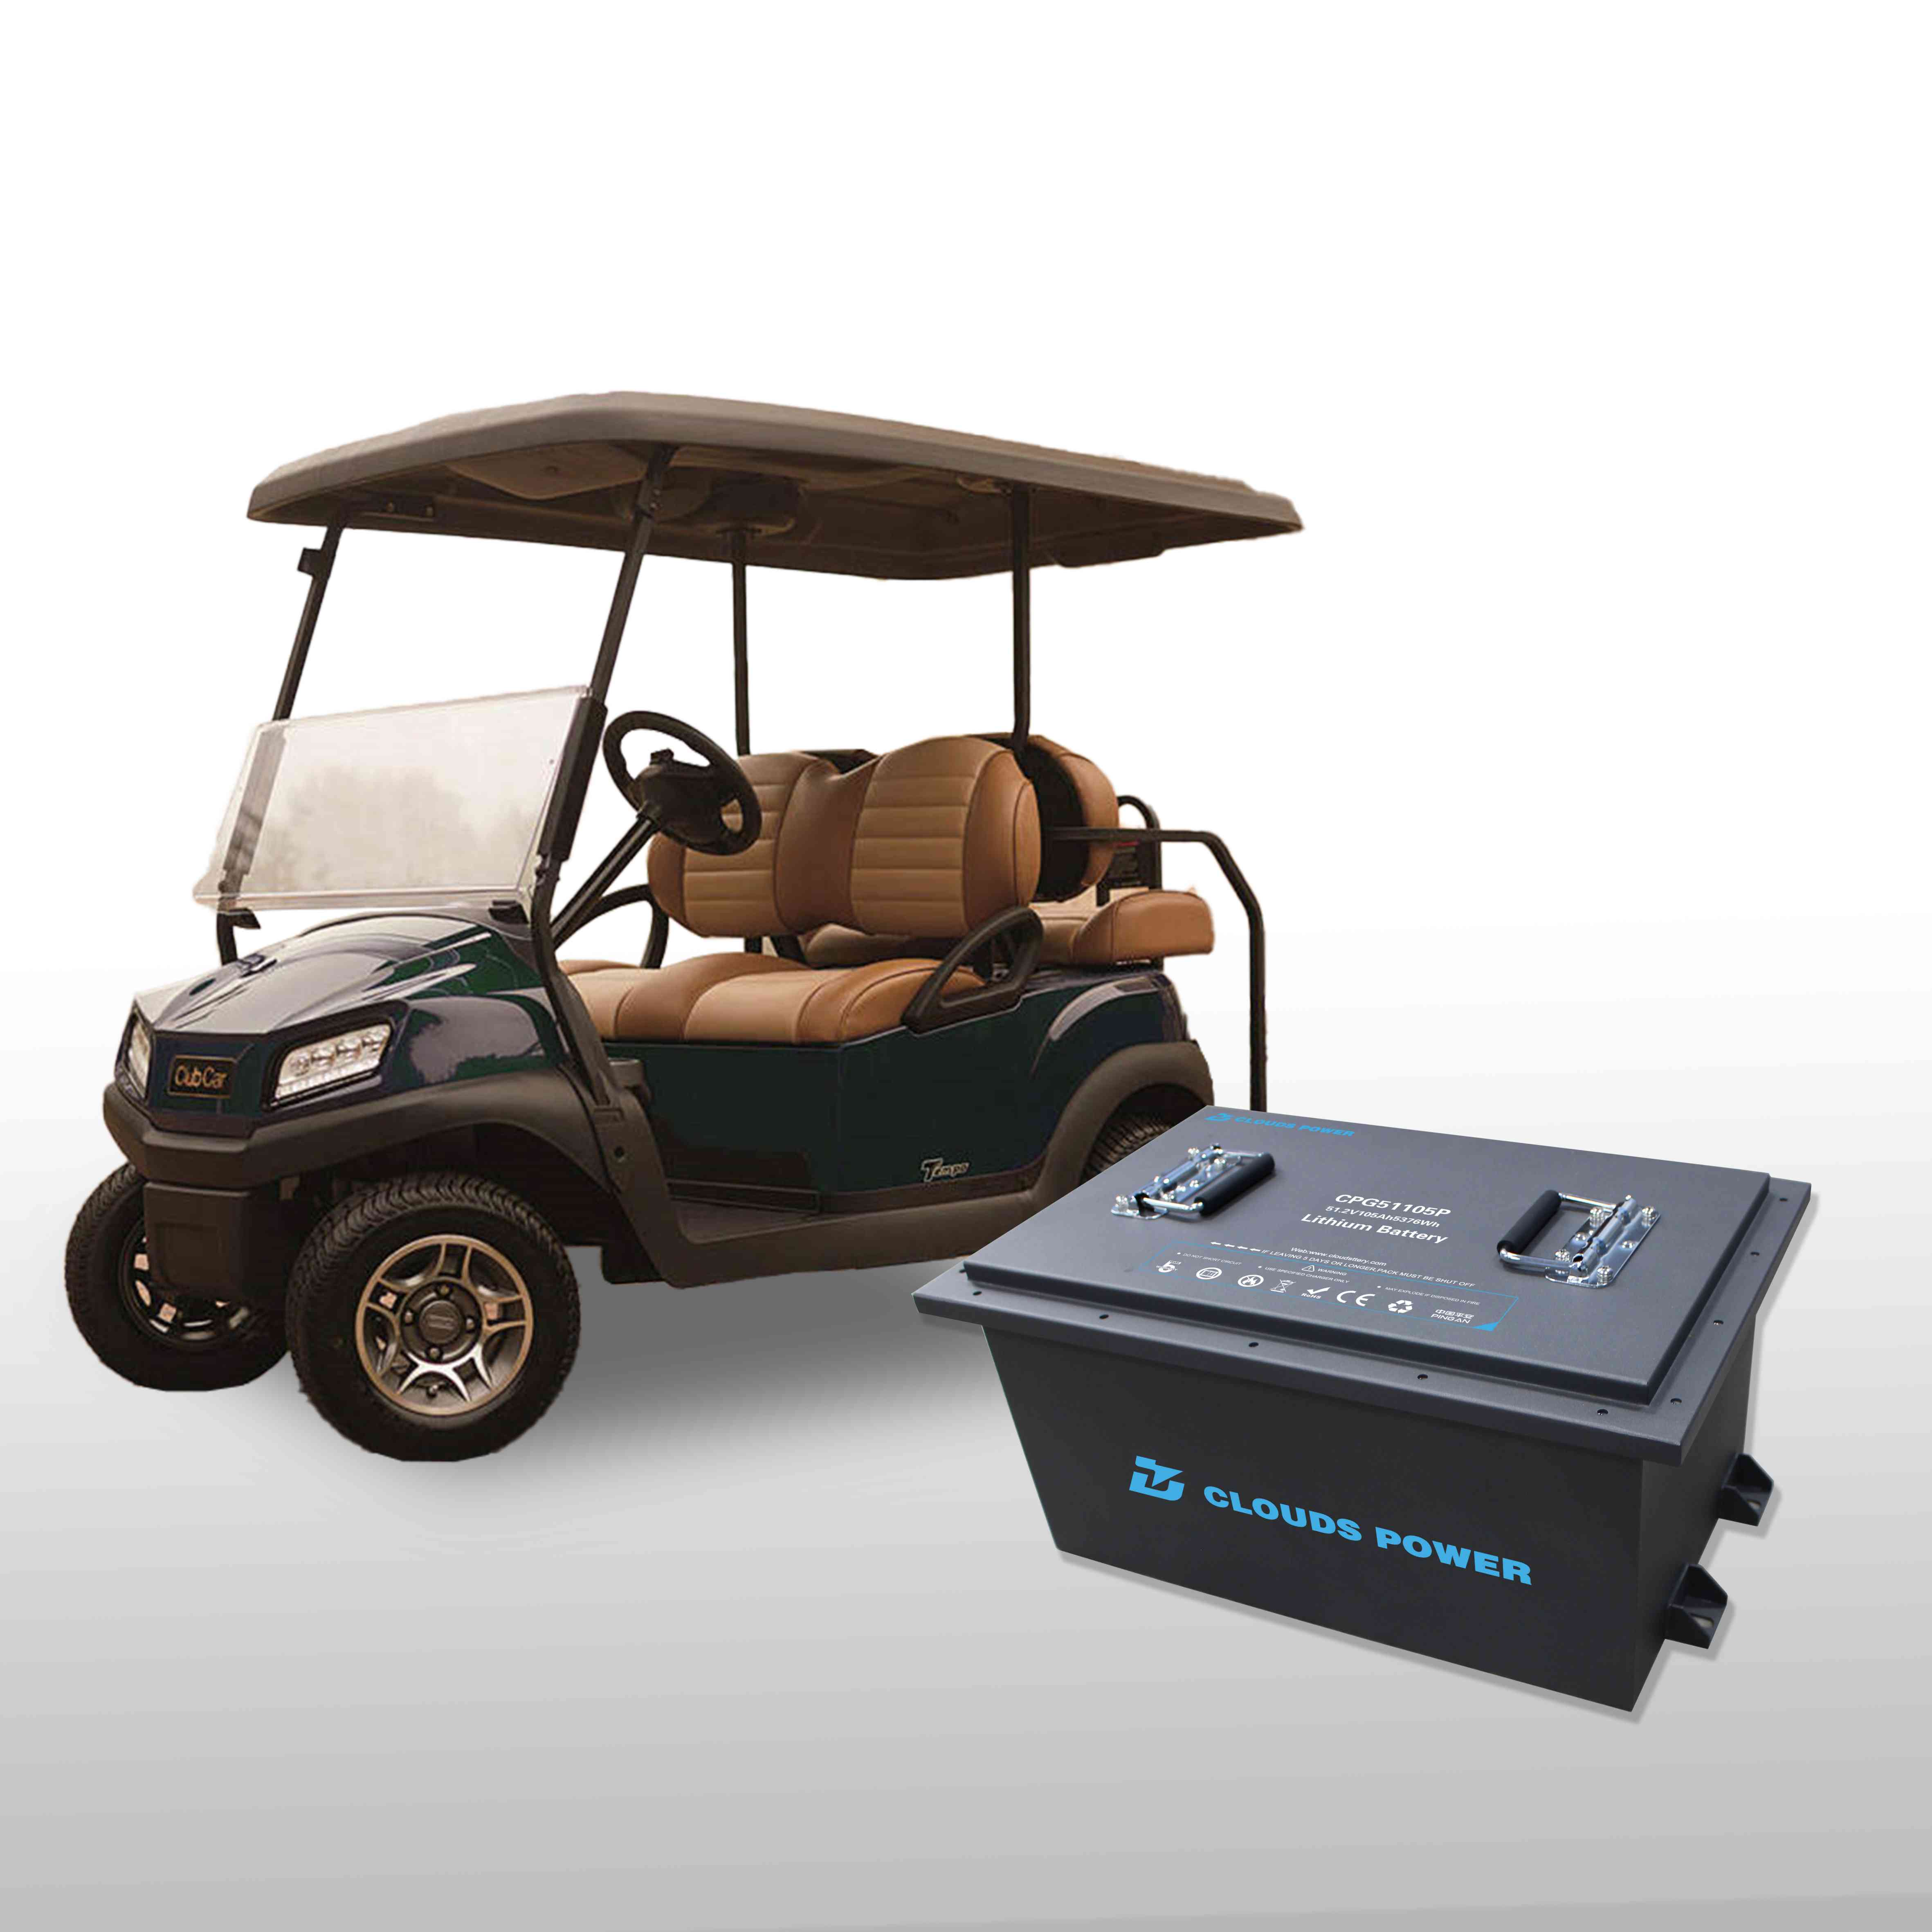 Clouds Power 51.2V105Ah LiFePO4 Electric Golf Cart Battery for Club Car